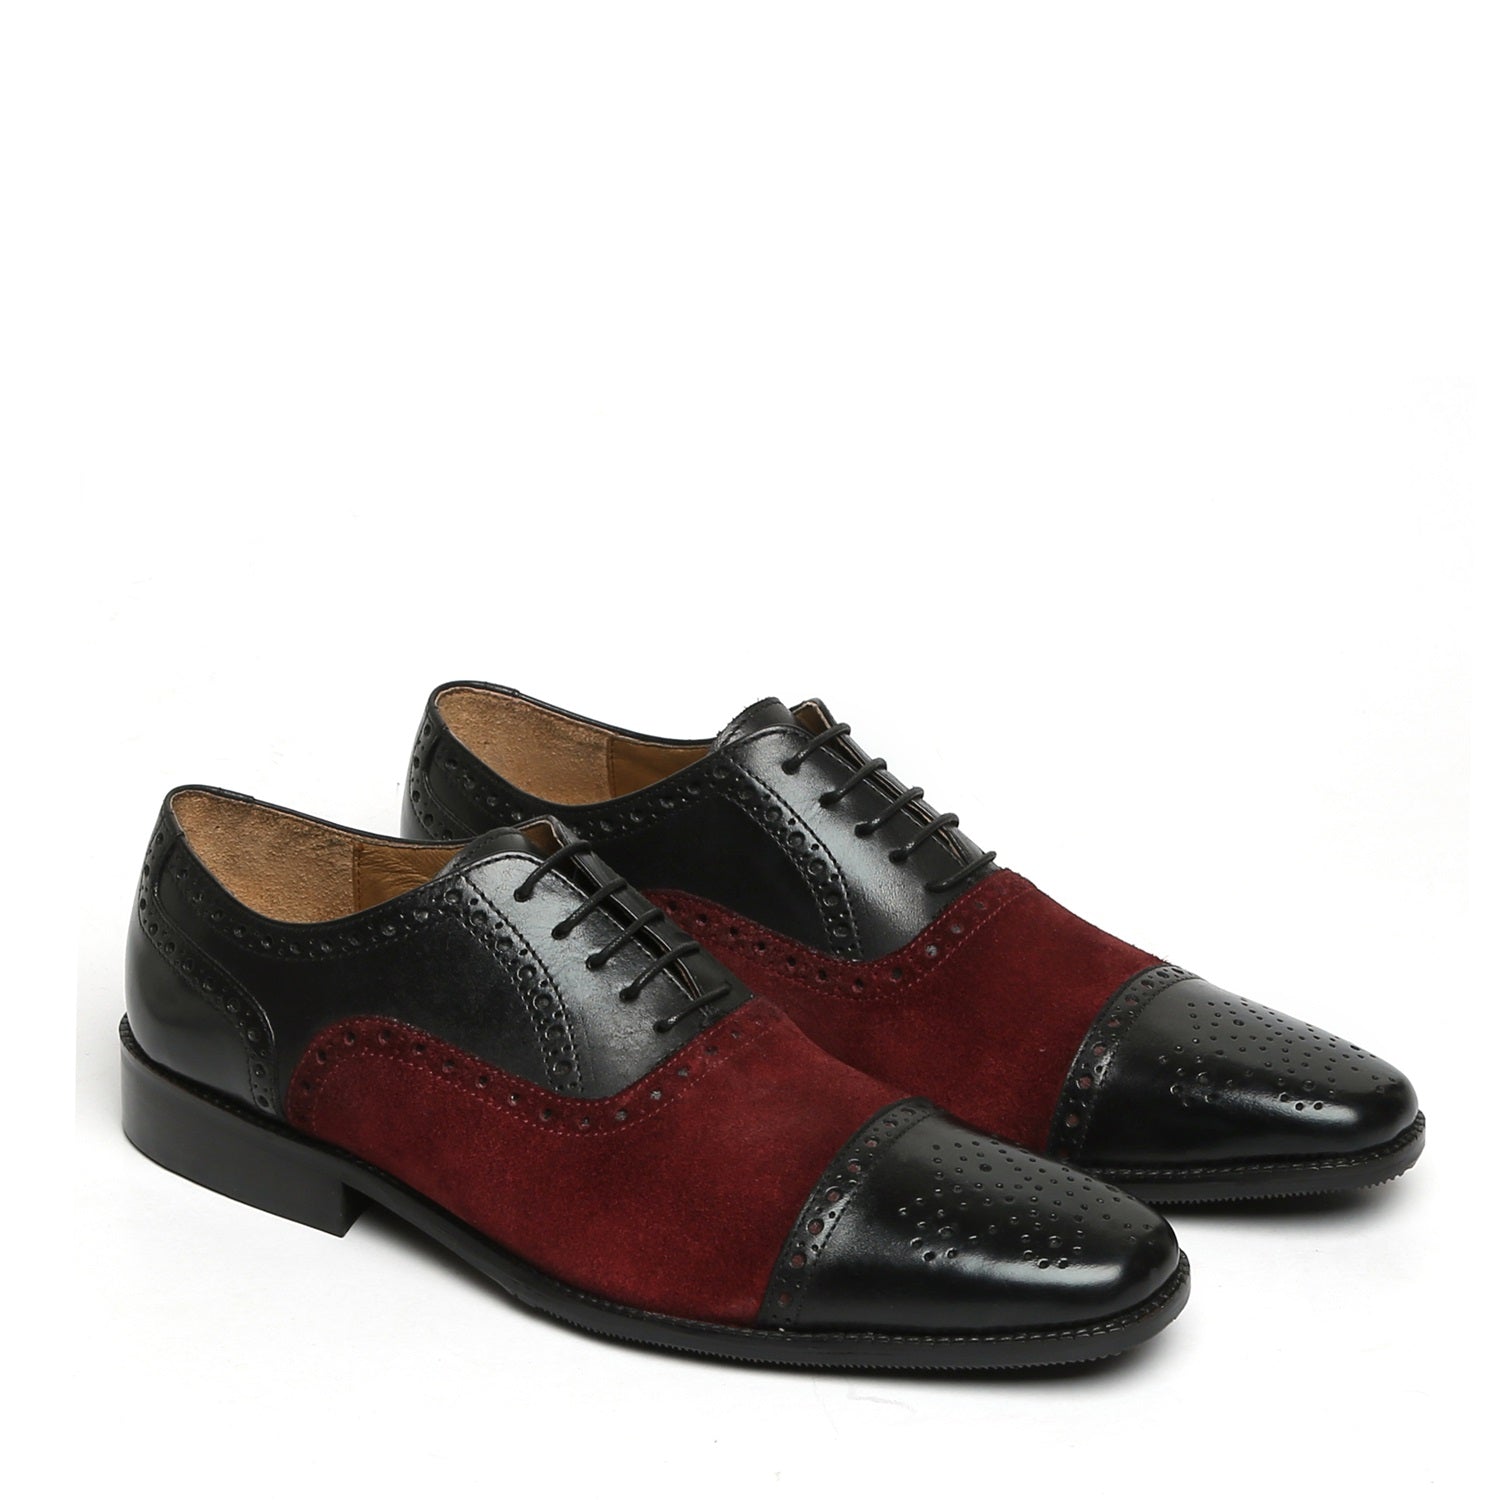 Black leather Oxford lace-up with dark red suede combination